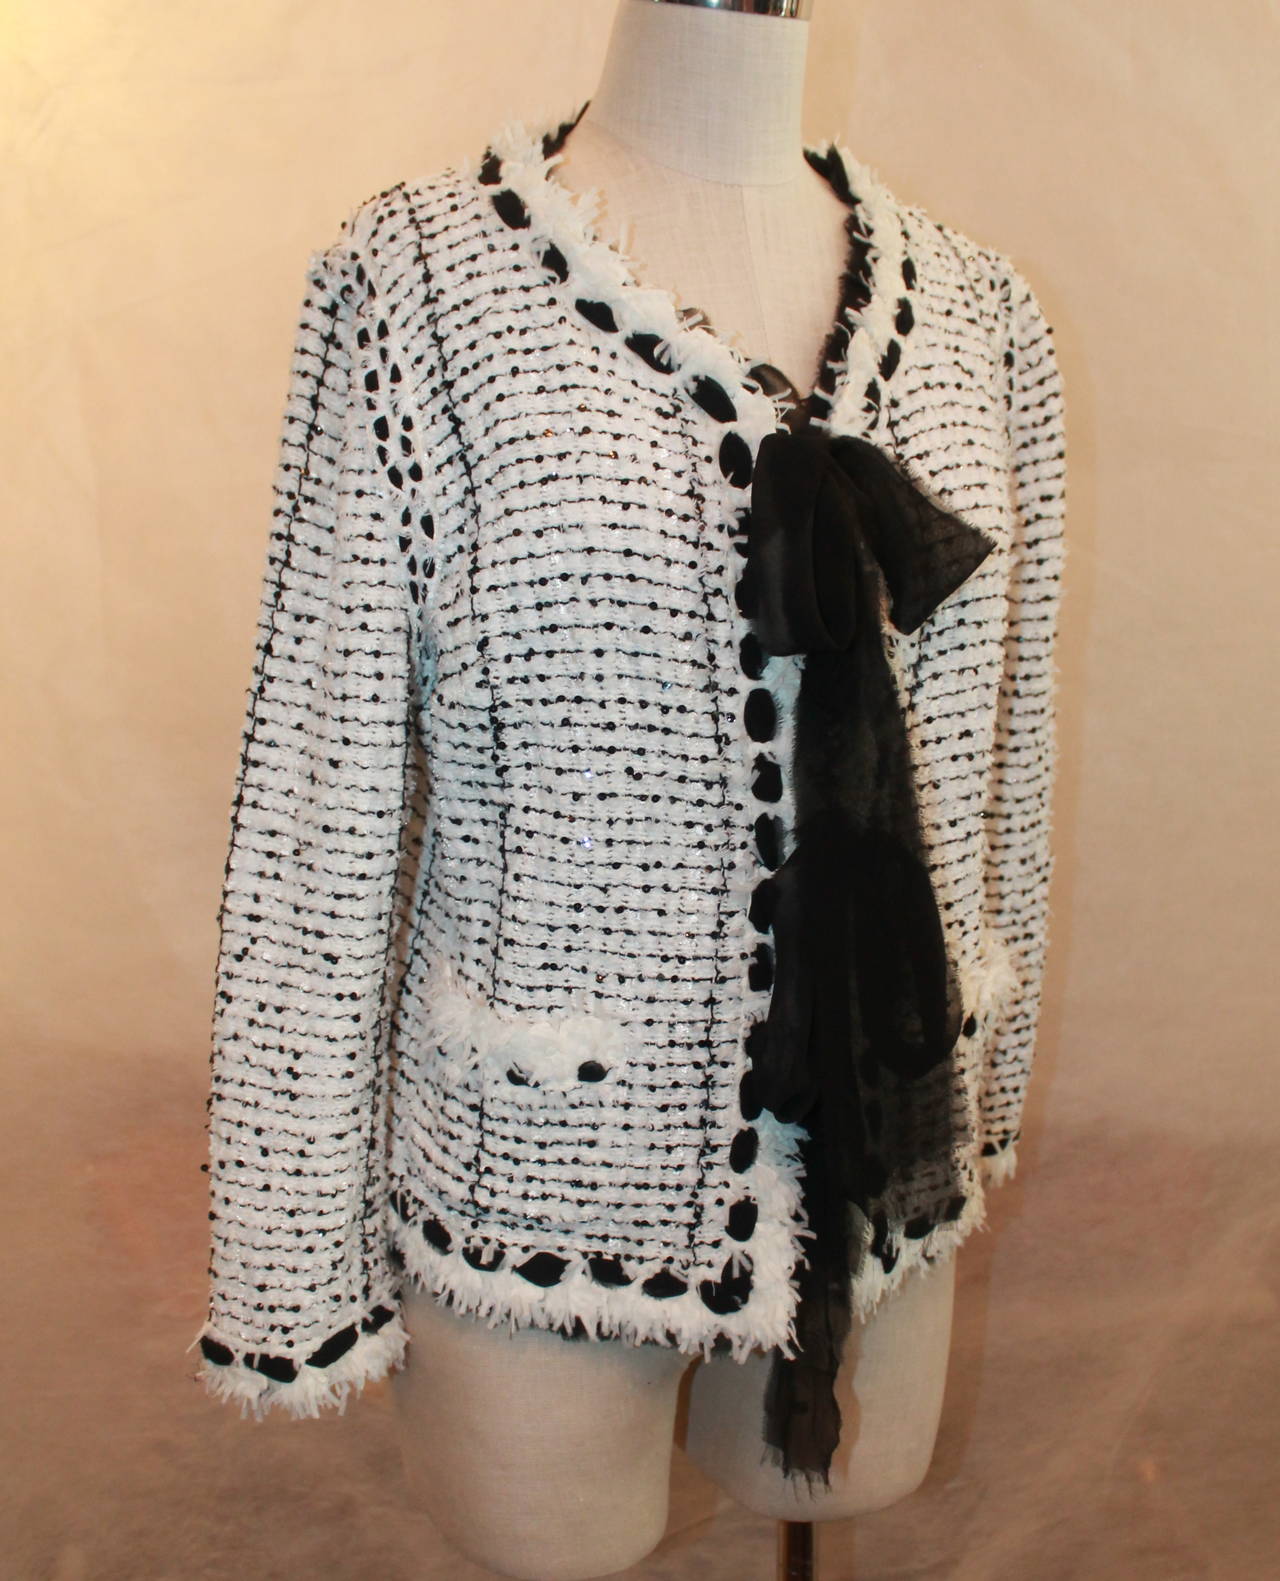 Chanel 2006 Black & White Tweed Sequin Jacket - 46. This jacket is in very good condition with a couple very minor pulls. It is a nylon, polyester, cotton, silk, and acetate blend. It has small black sequins on the black tweed and also a fringed